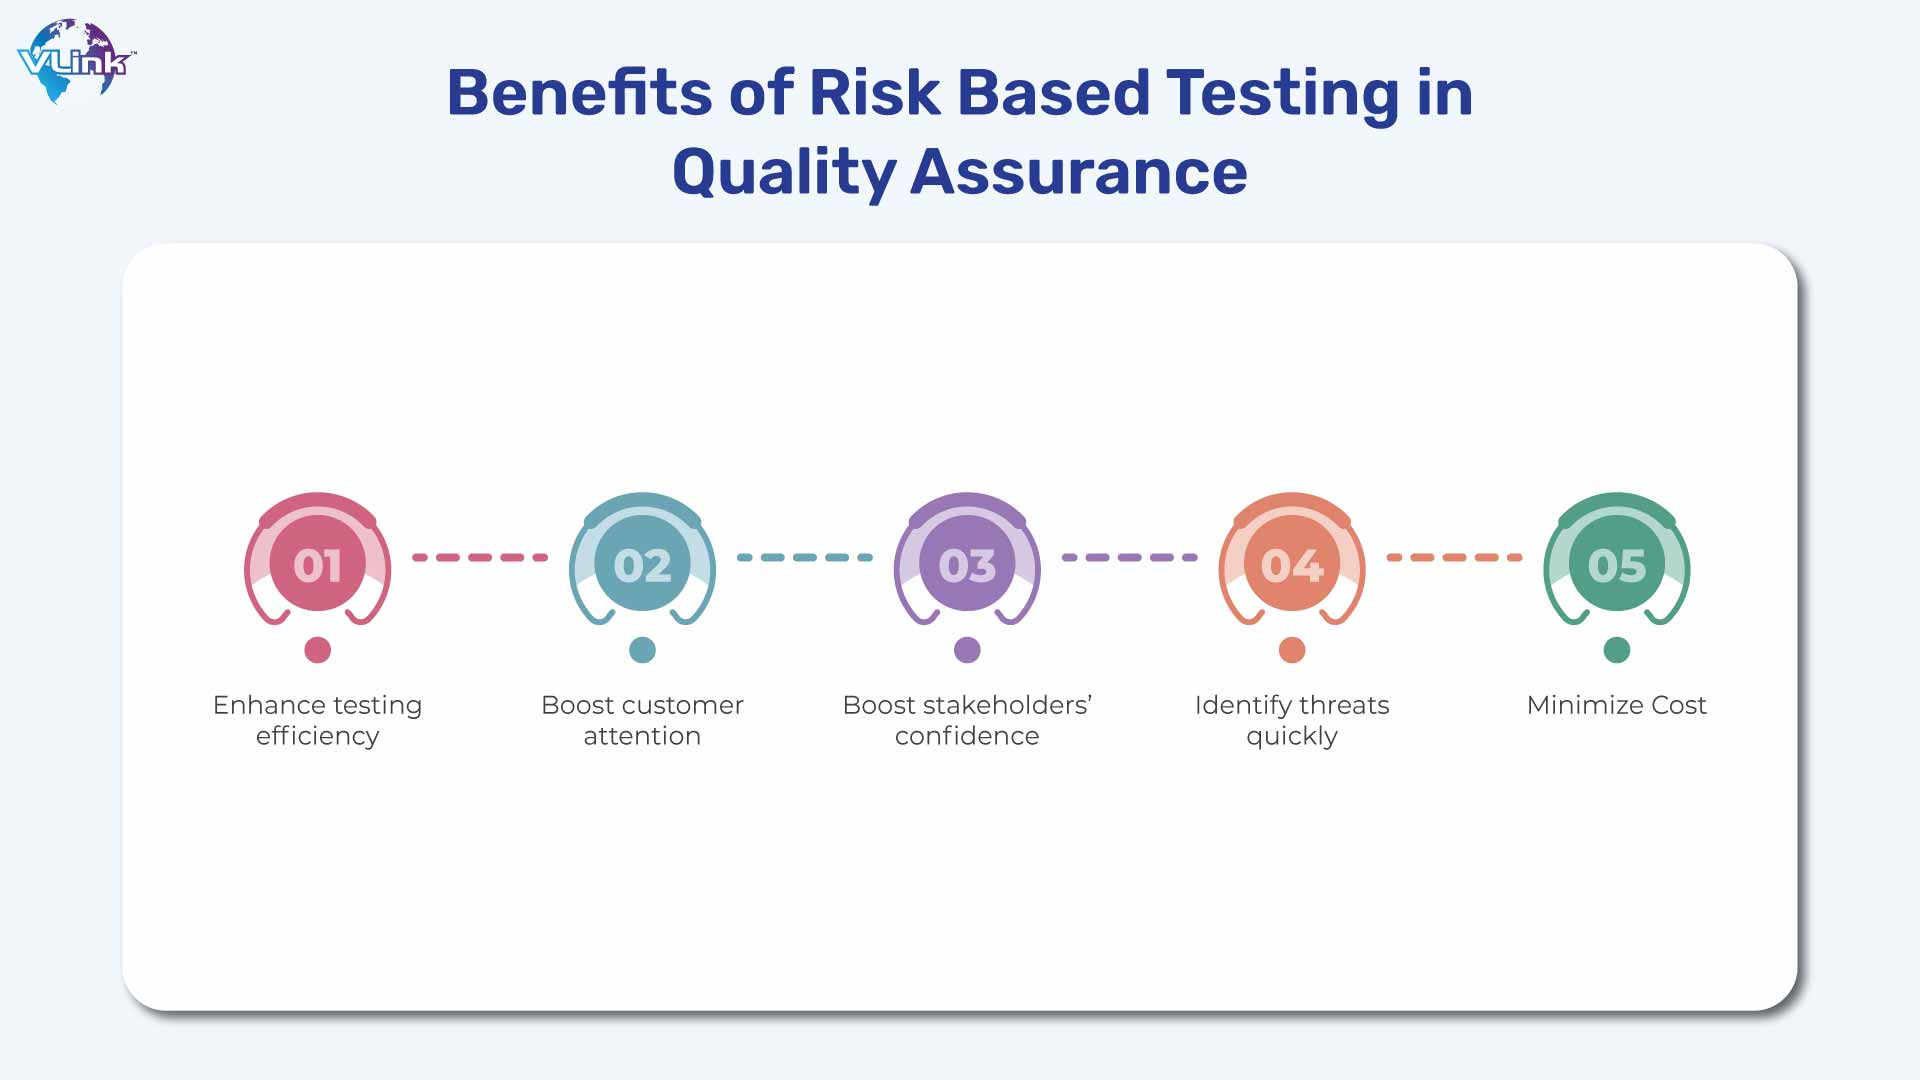 Benefits of Risk Based Testing in Quality Assurance